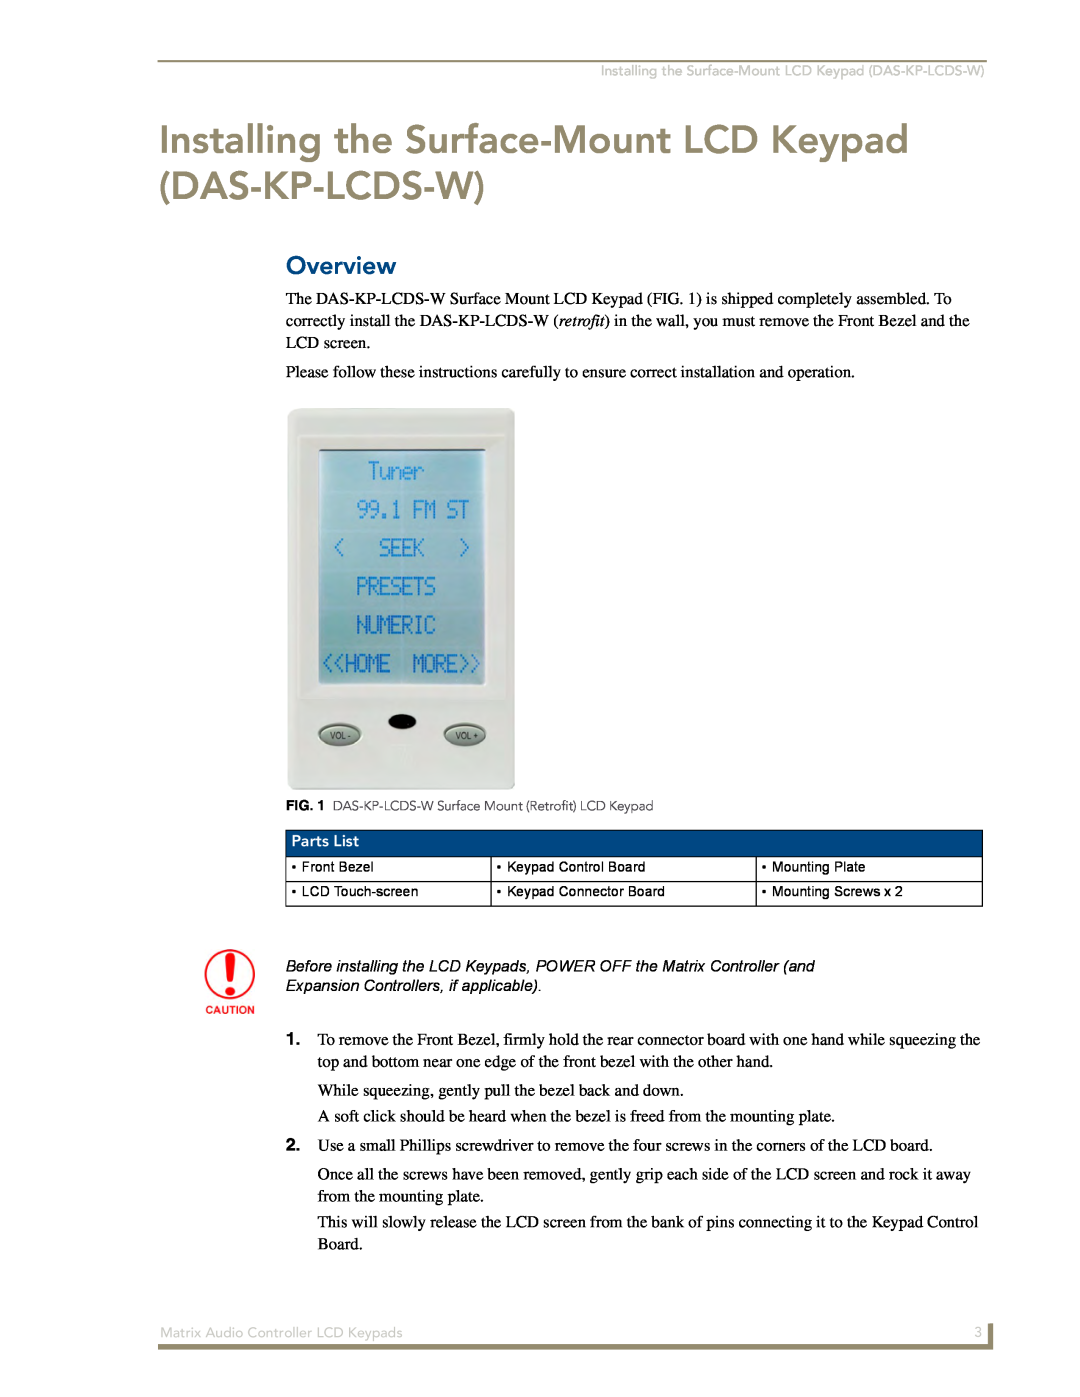 AMX DAS-KP-LCD-G, DAS-KP-LCDS-W manual Overview, Parts List, Expansion Controllers, if applicable 